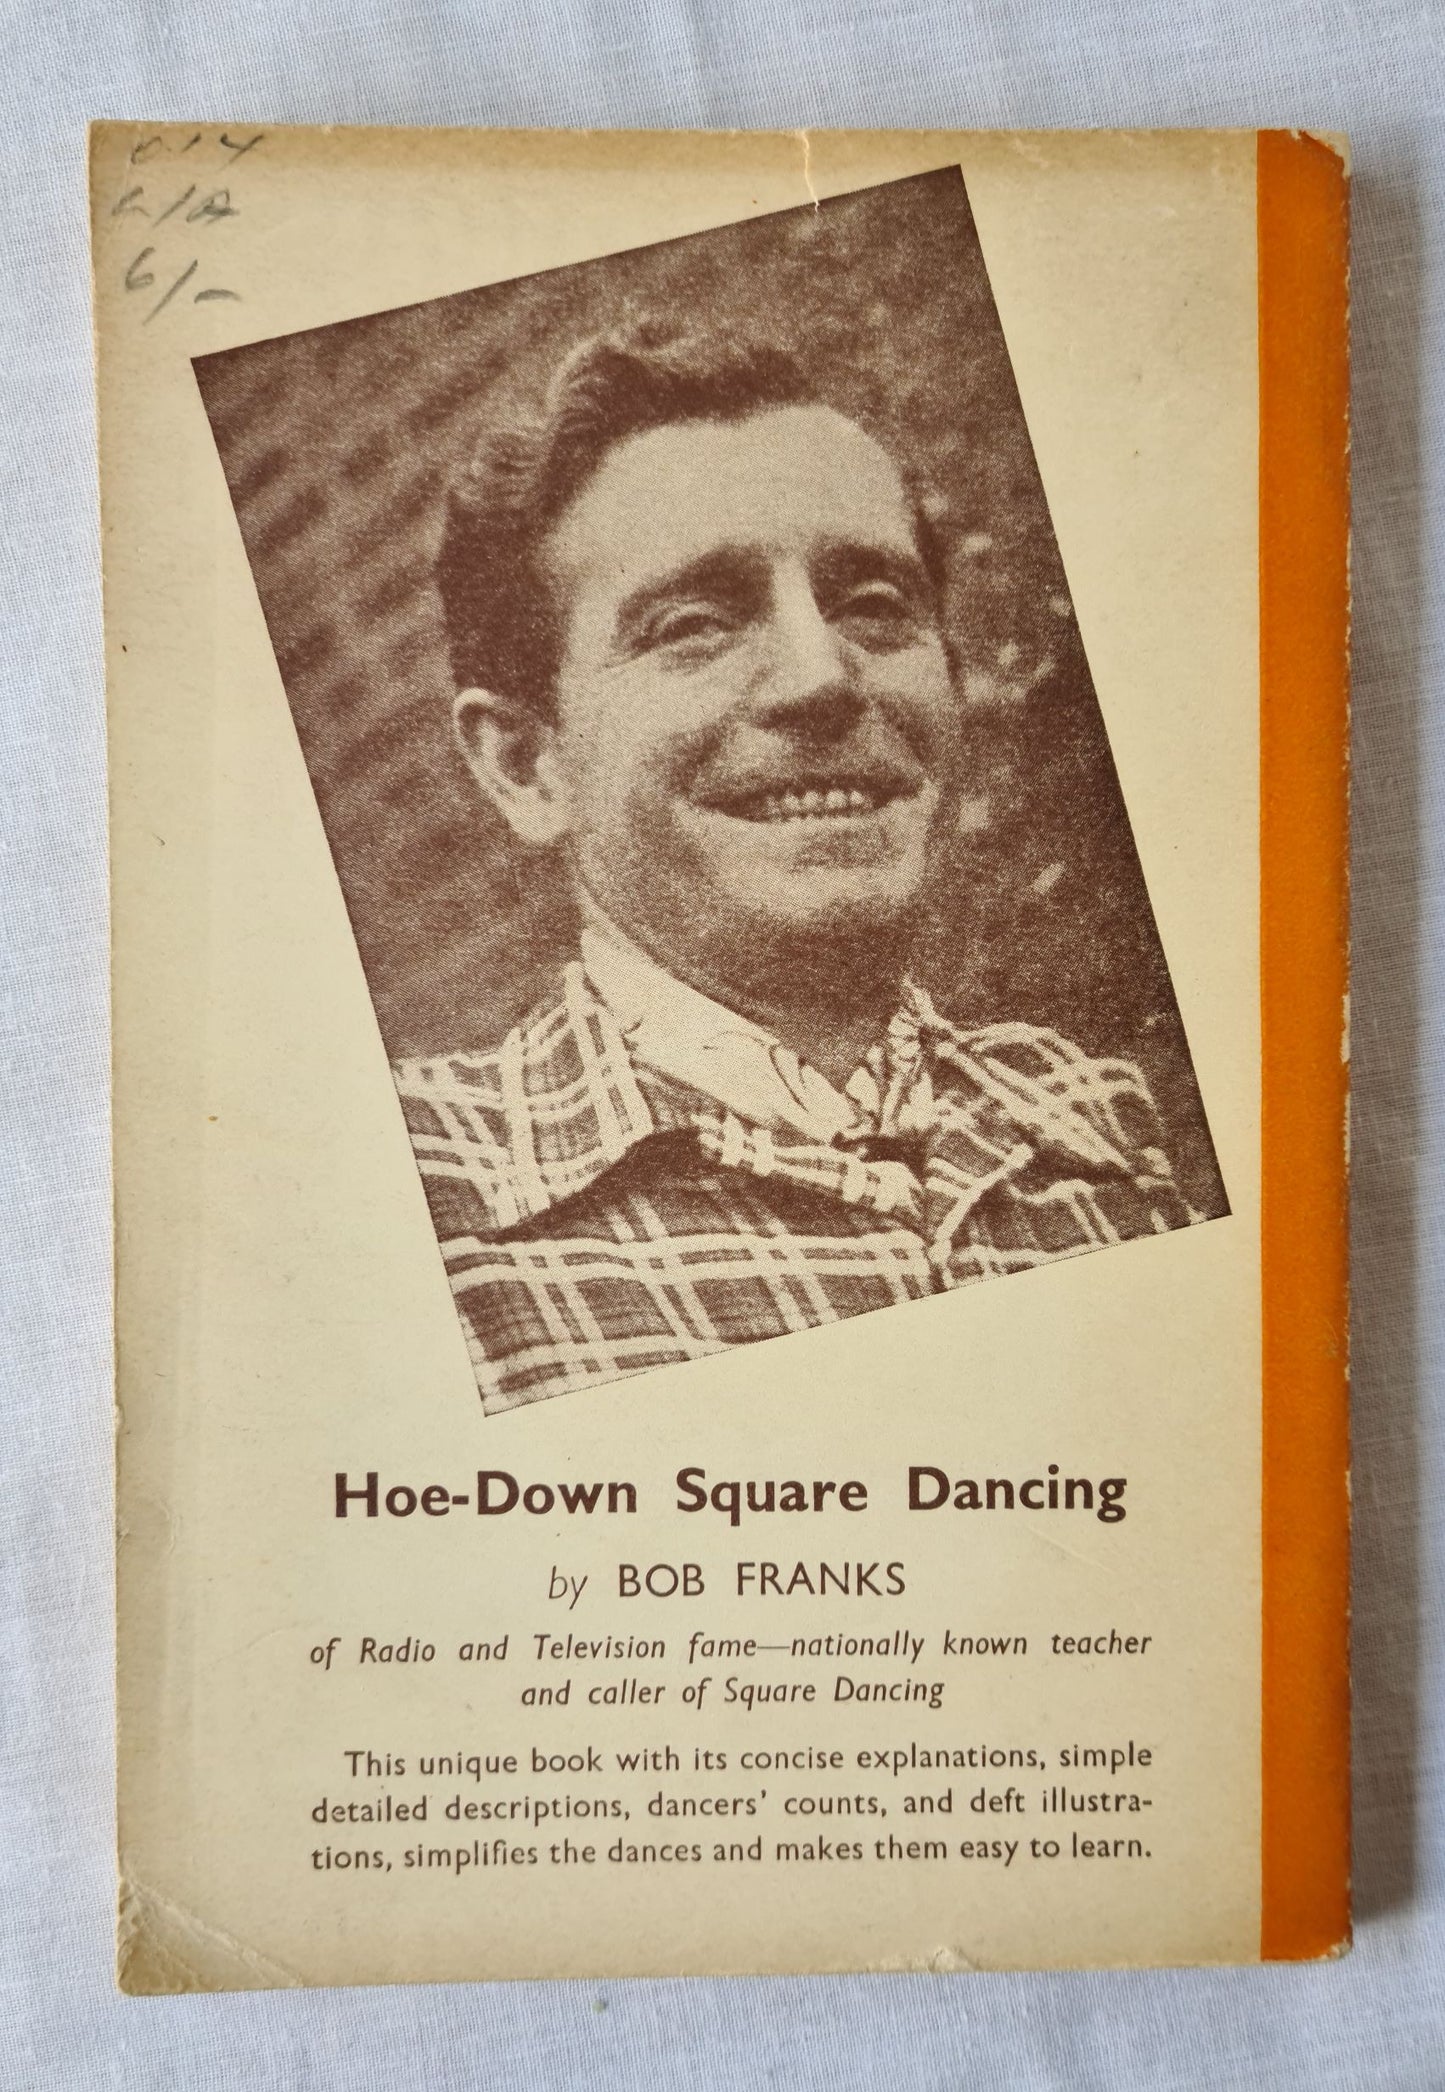 Hoe-Down Square Dancing by Bob Franks